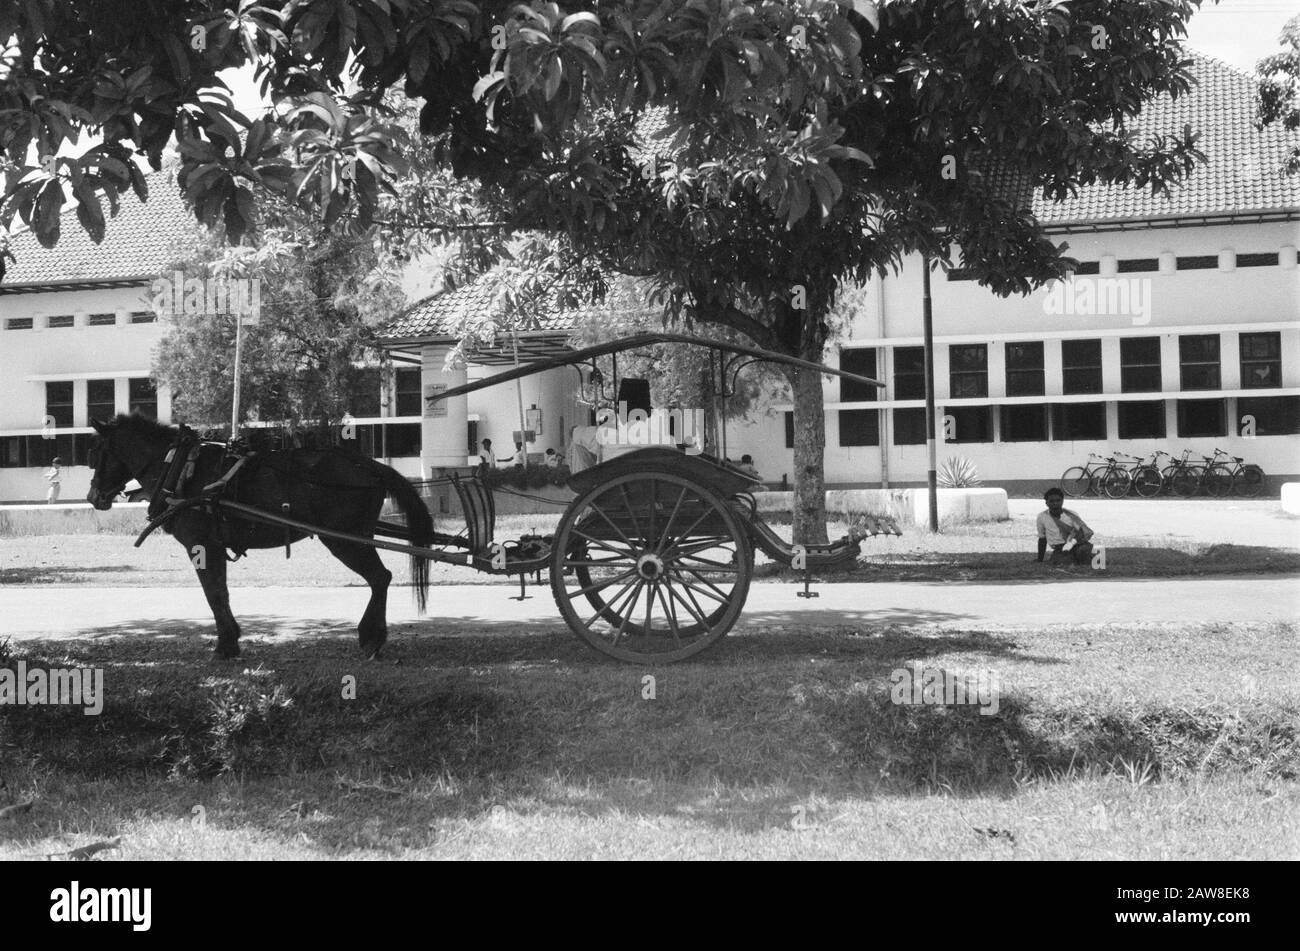 Collection / Archive: Photo Collection Service for Military Contacts Indonesia Report / Series  City Recordings Medan  Medan, one of the most beautiful cities in Indonesia. Notable is the clarity in this town that can stand comparison with many European cities. The city has many beautiful buildings and beautiful nature spots, [a dokar waiting for a passenger] Date: March 1949 Location: Indonesia, Medan, Dutch East Indies, Sumatra Stock Photo